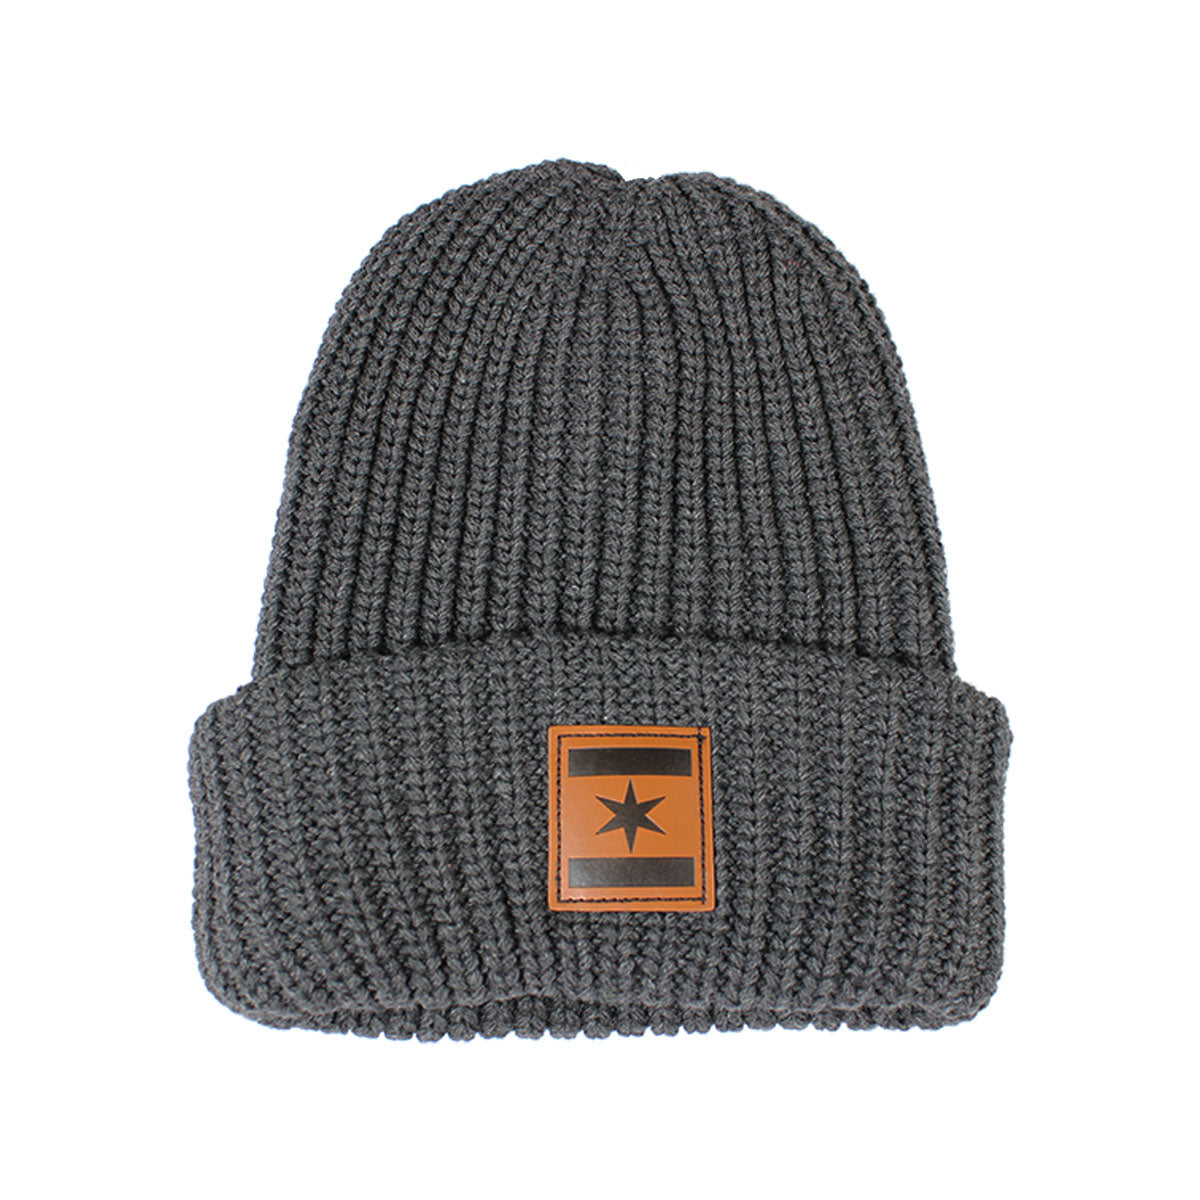 We Are One Star Beanie (Charcoal)